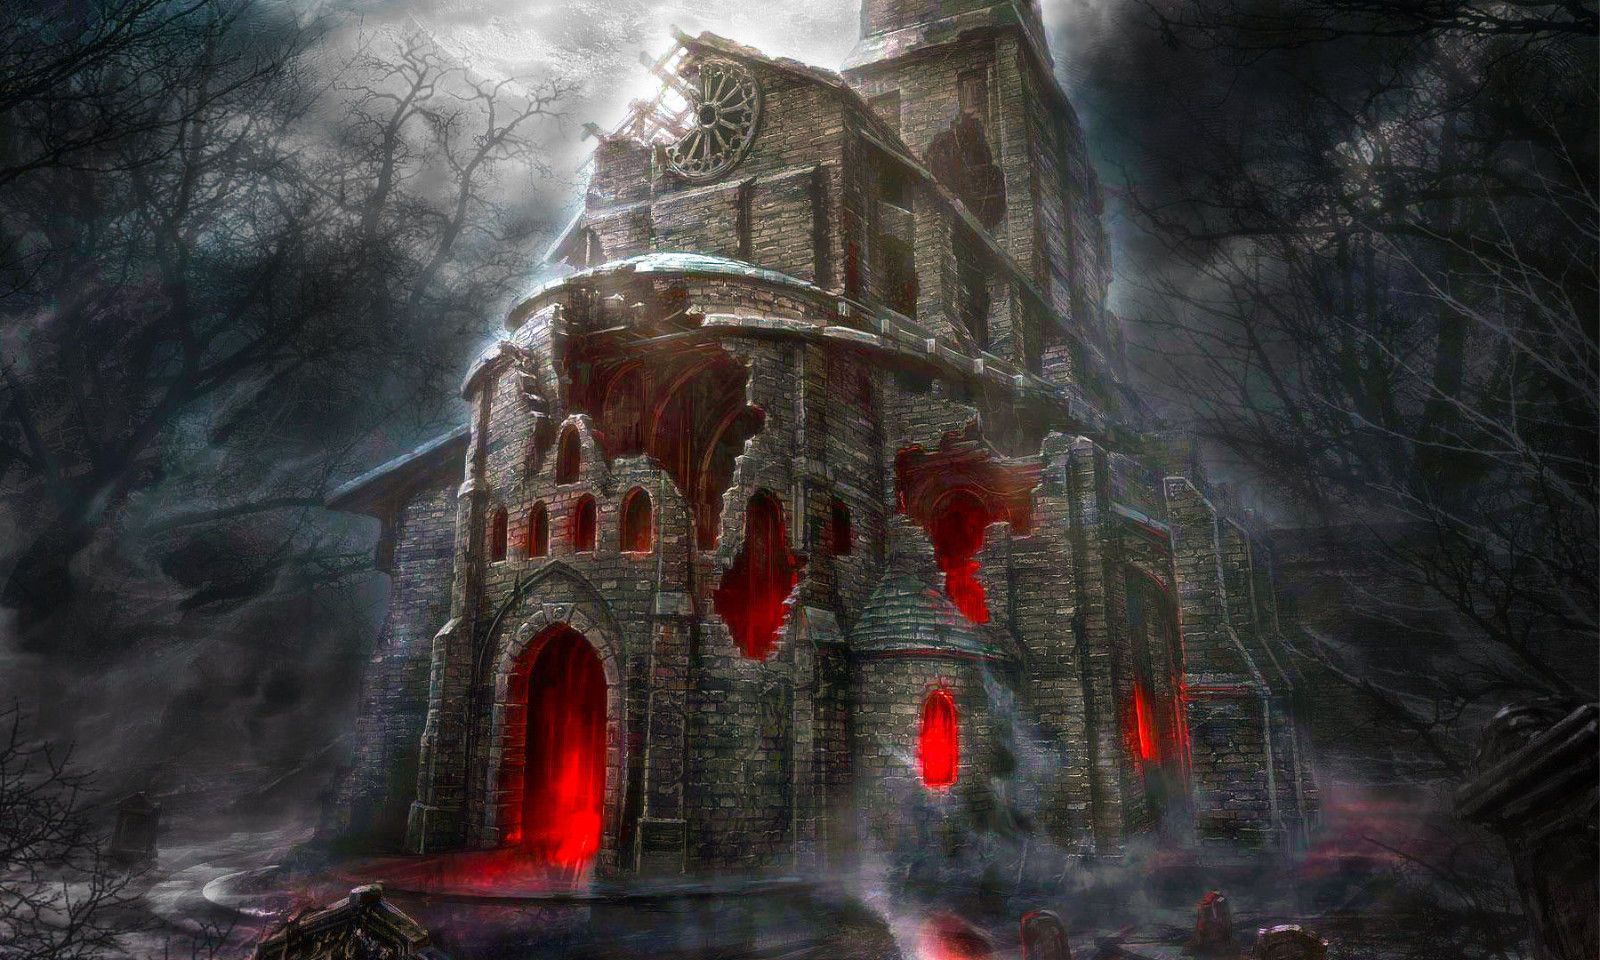 1600x960 4 95 Gbp Framed Print Haunted Ruins Of An Old Church Gothic Picture Horror Poster Art Ebay Home Garden Gothic Wallpaper Scary Houses Scary Wallpaper